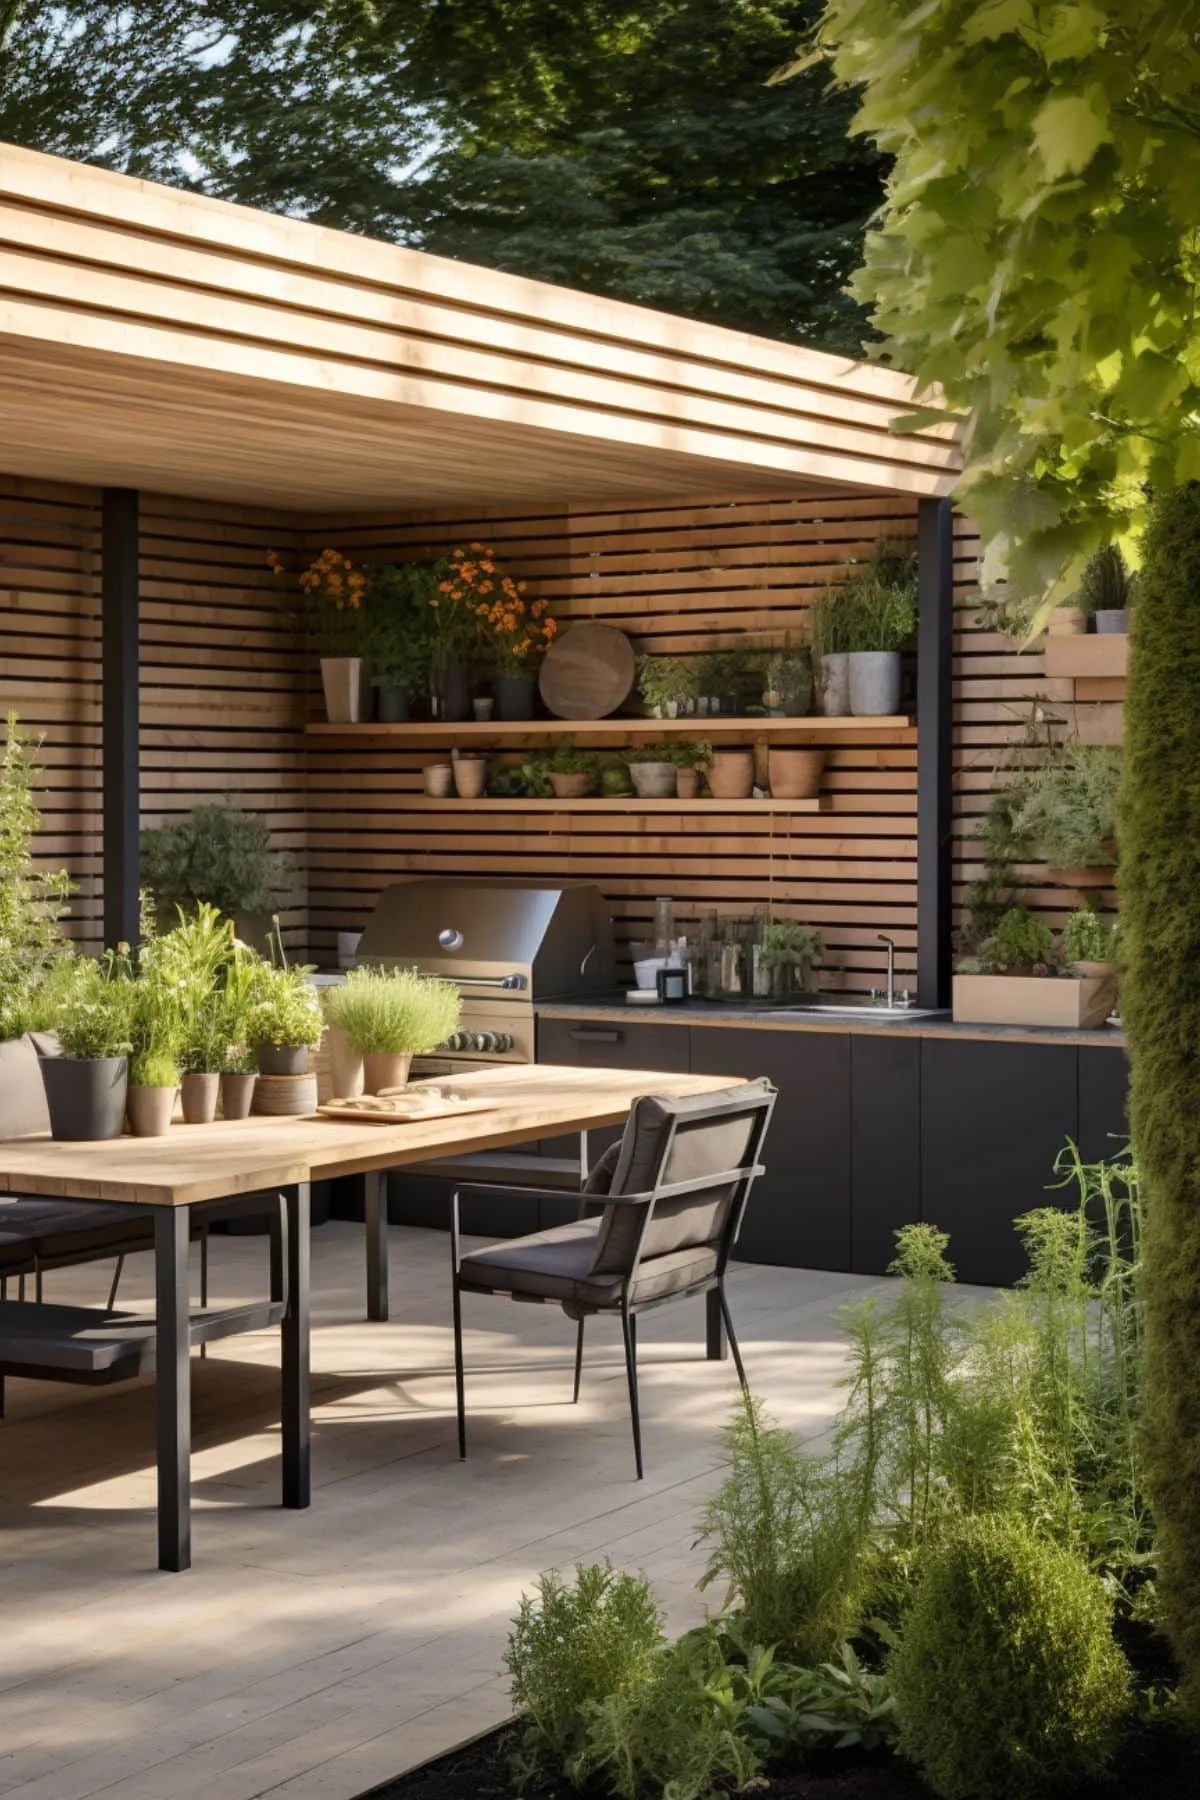 Indoor Outdoor Living Spaces: How to Successfully Integrate the Home and Garden